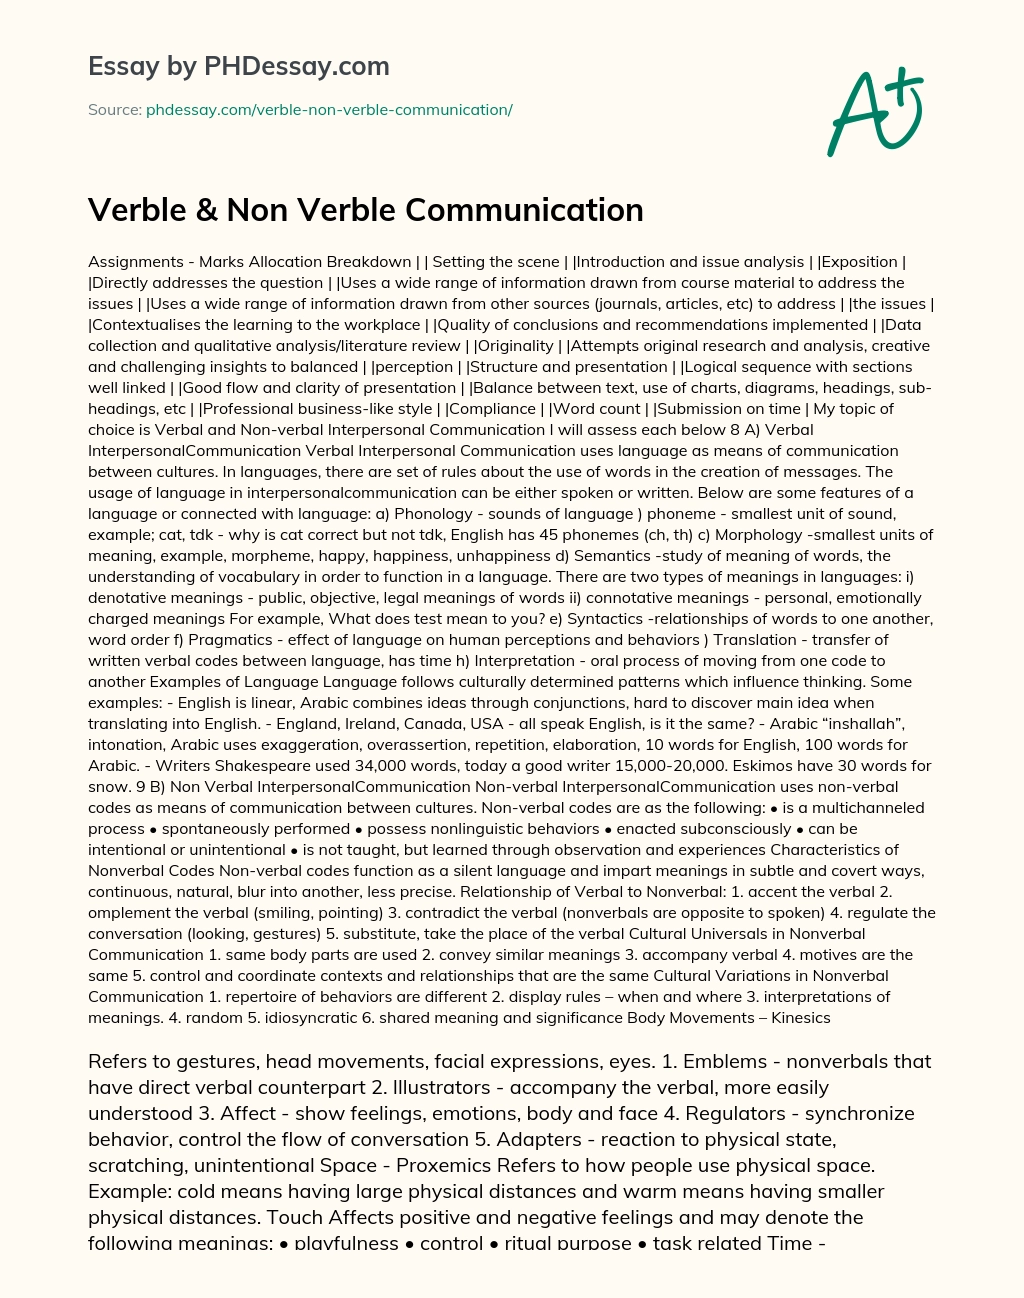 Verble & Non Verble Communication essay